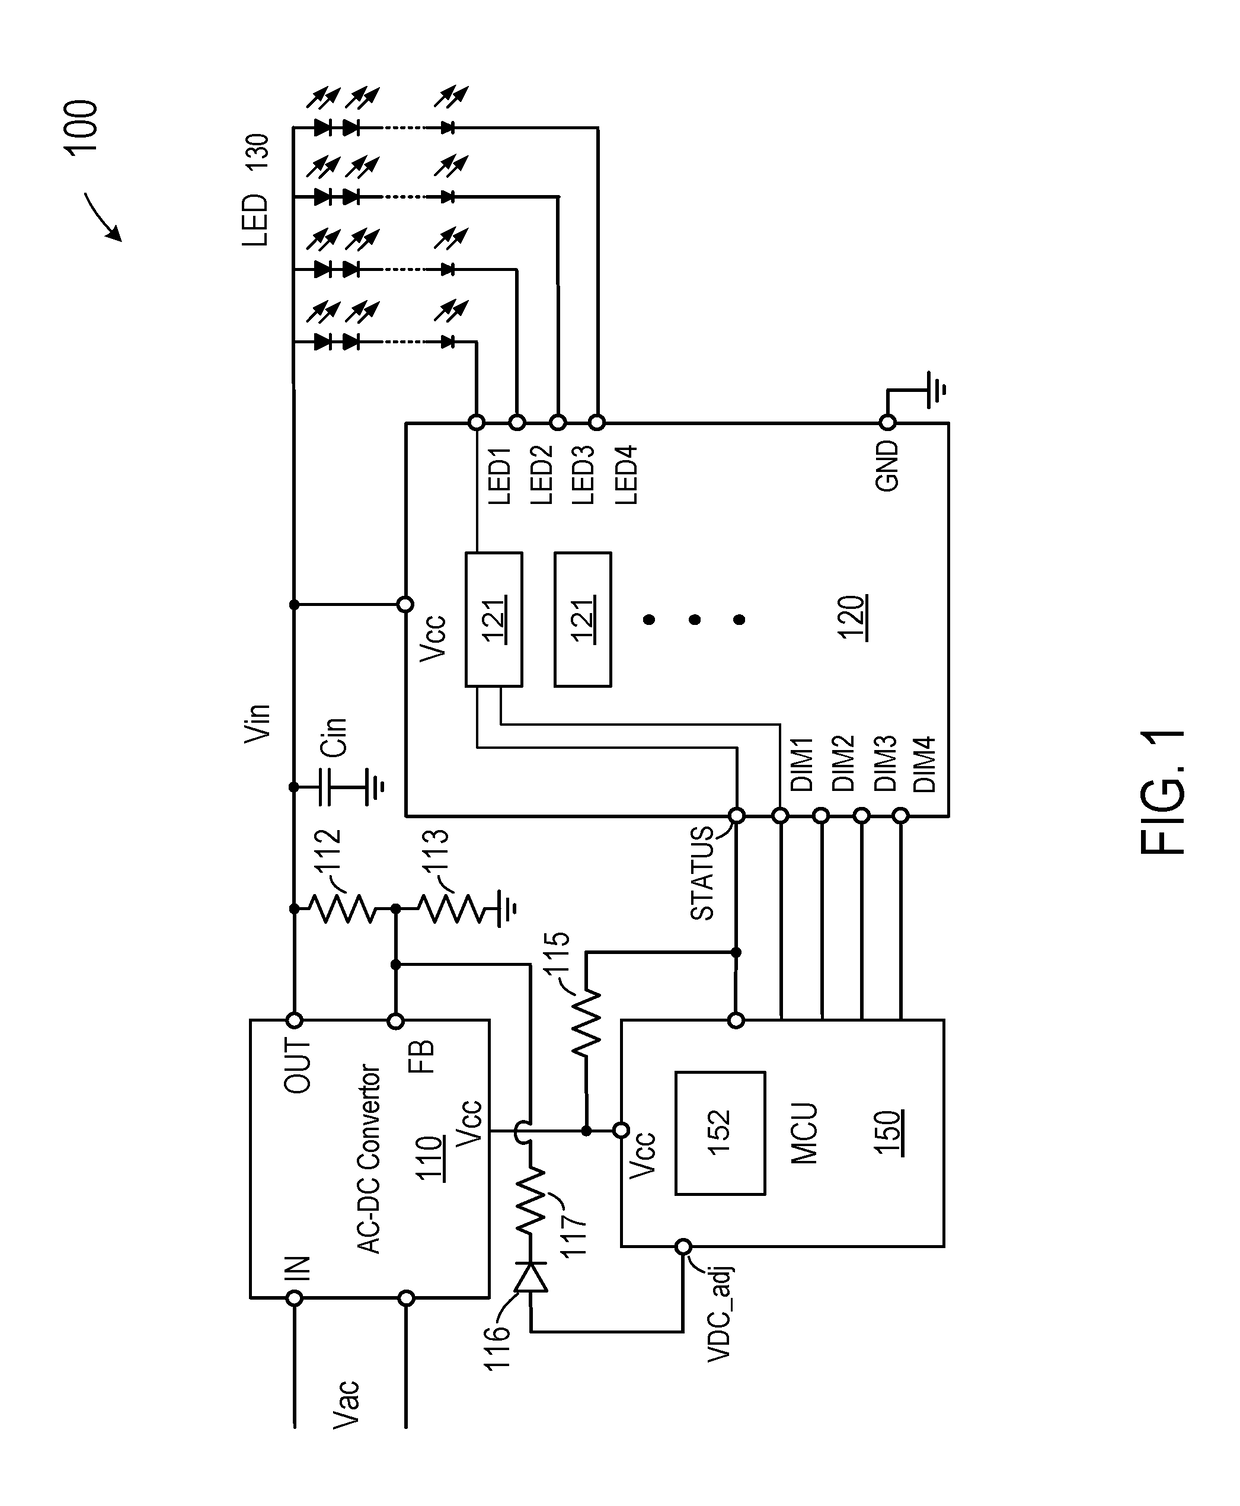 Thermal and power optimization for linear regulator